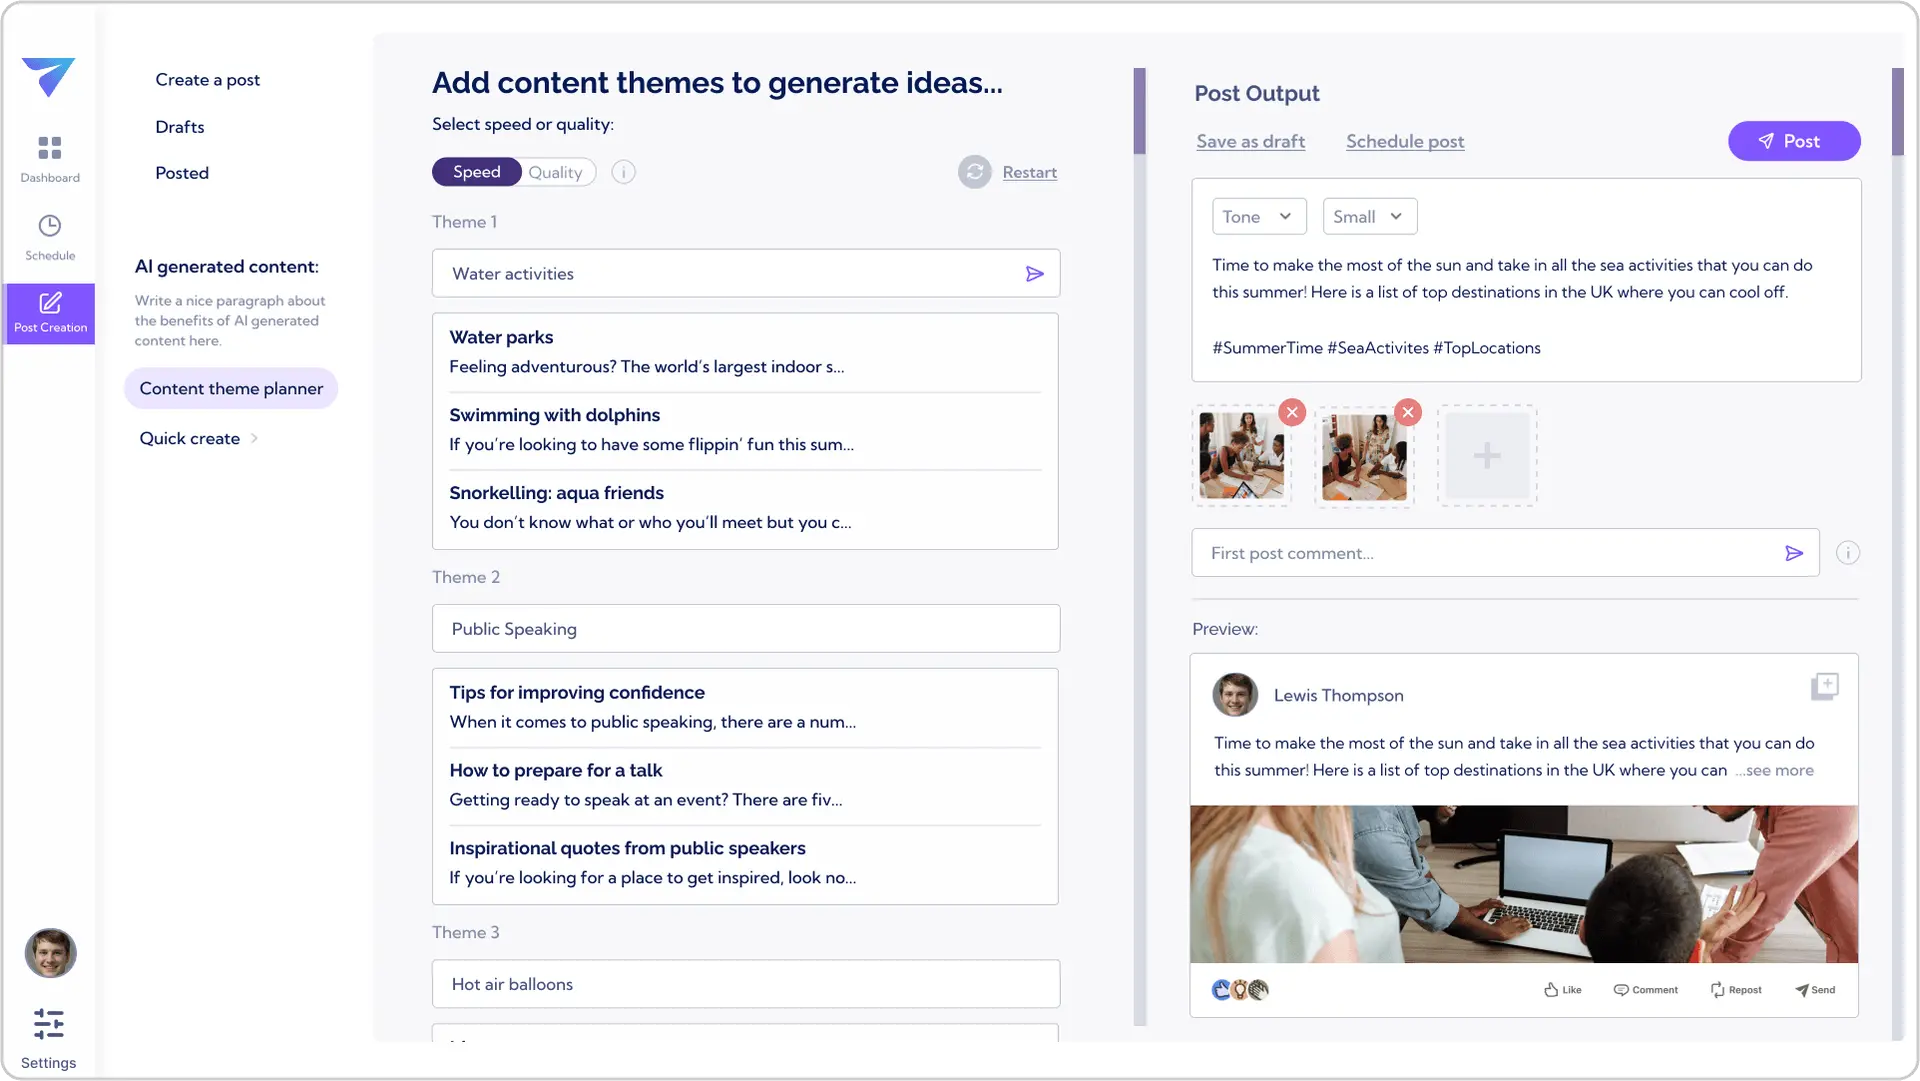 Content theme planner that shows how user can generate LinkedIn content ideas.